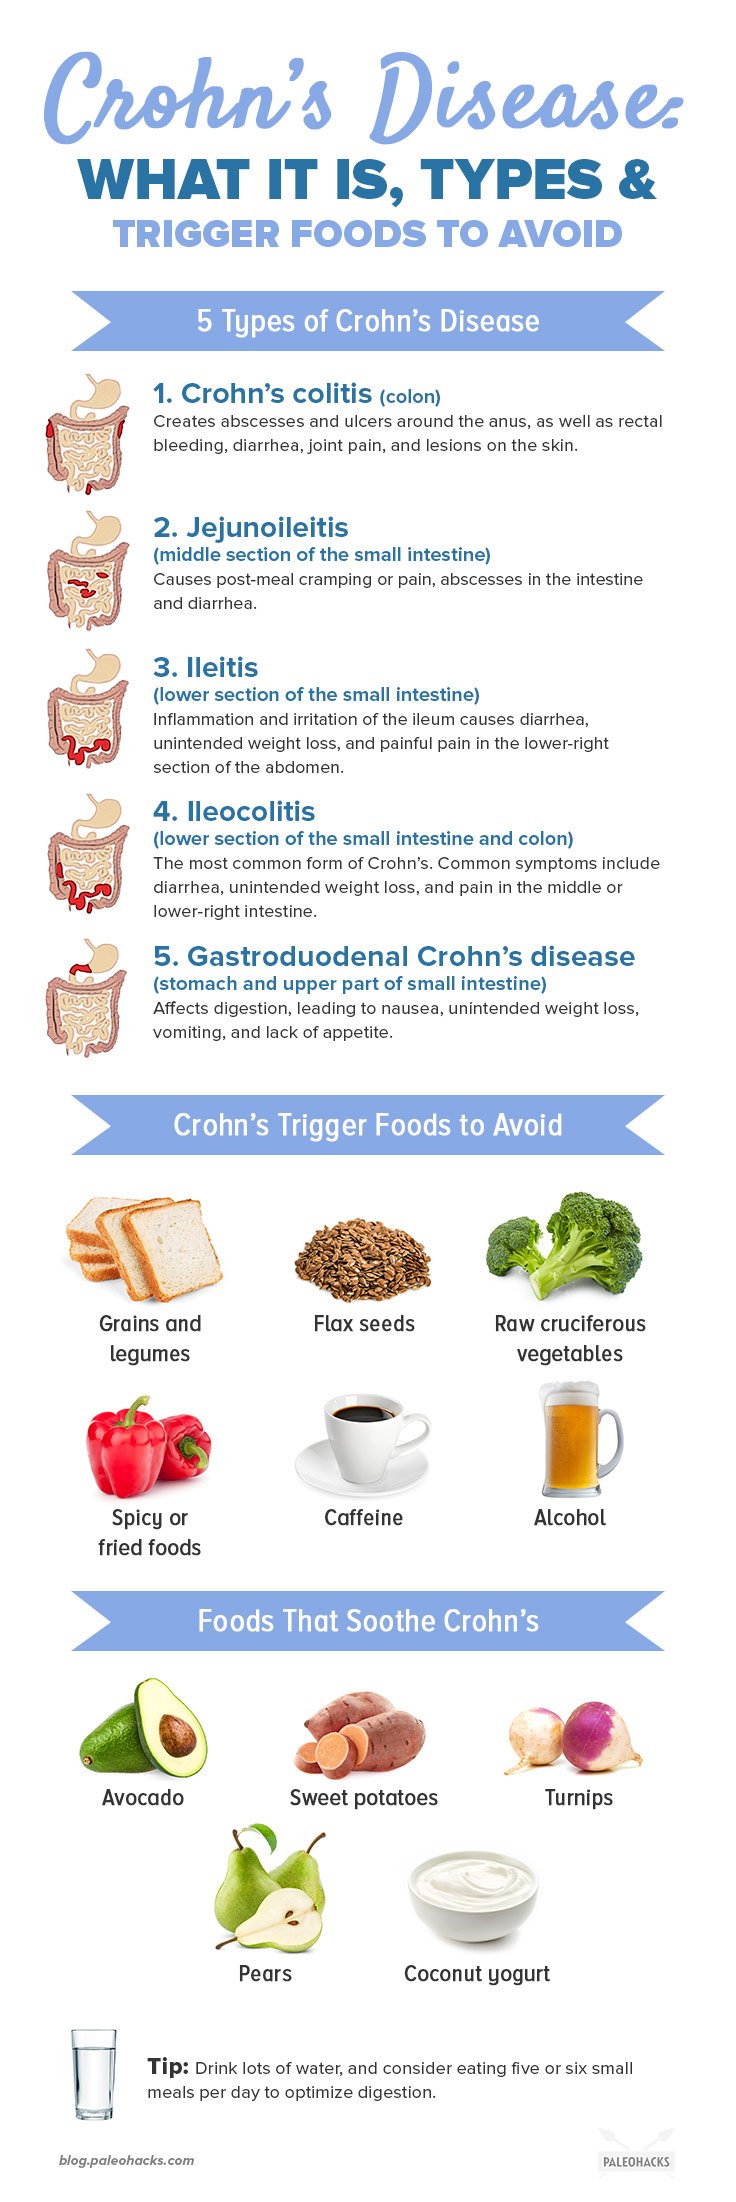 Crohn's Disease: What It Is, Types & Trigger Foods to ...